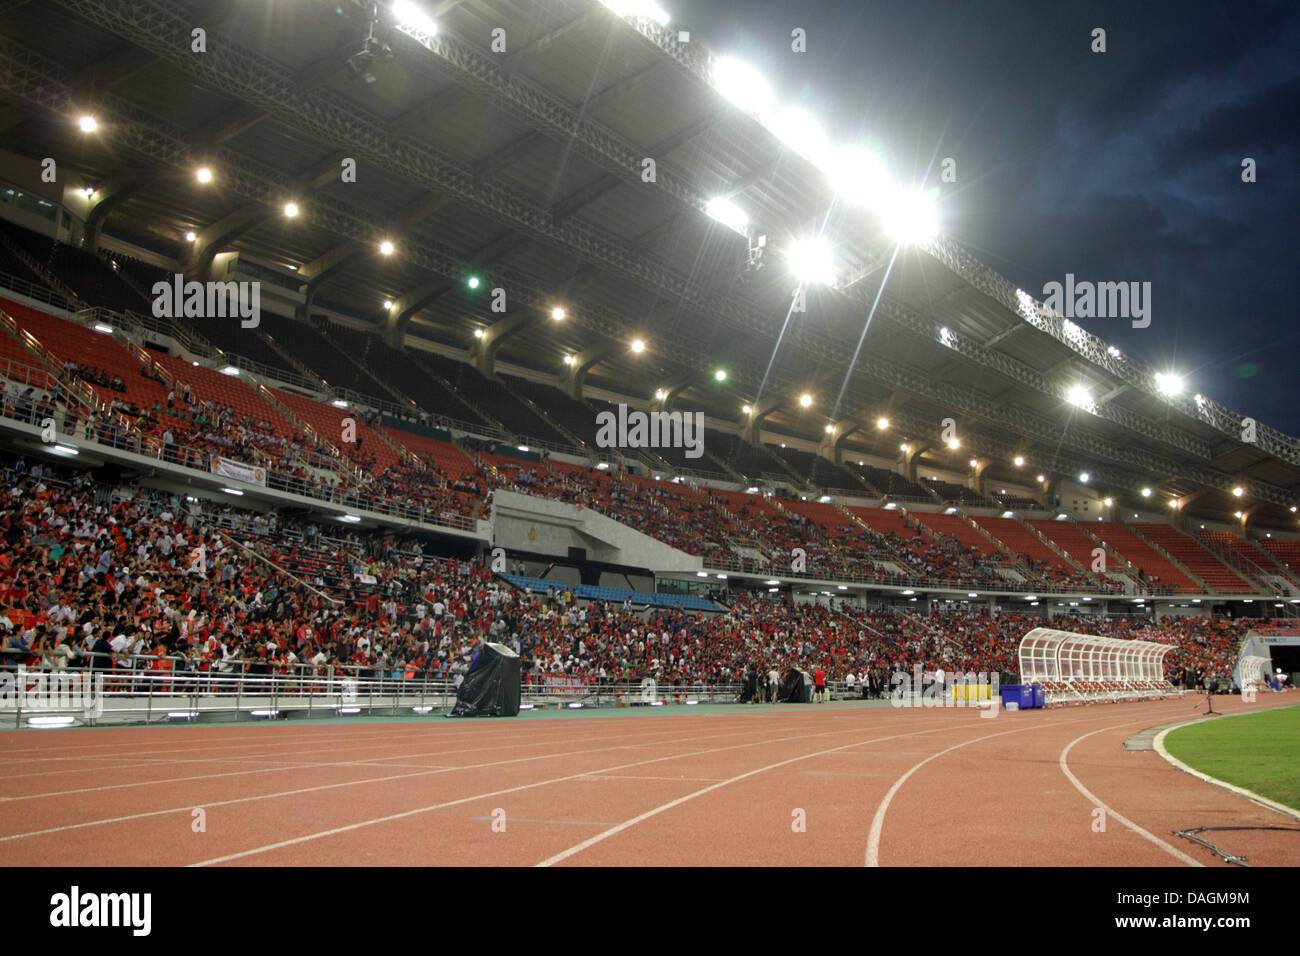 Bangkok, Thailand. 12th July 2013. Manchester United arrived in Thailand to have a friendly match with the Thai All-Star XI on 13 July at the Rajmalanga Stadium as part of their pre-season tour of Bangkok, Australia, China, Japan and Hong Kong. Credit:  Piti A Sahakorn/Alamy Live News Stock Photo